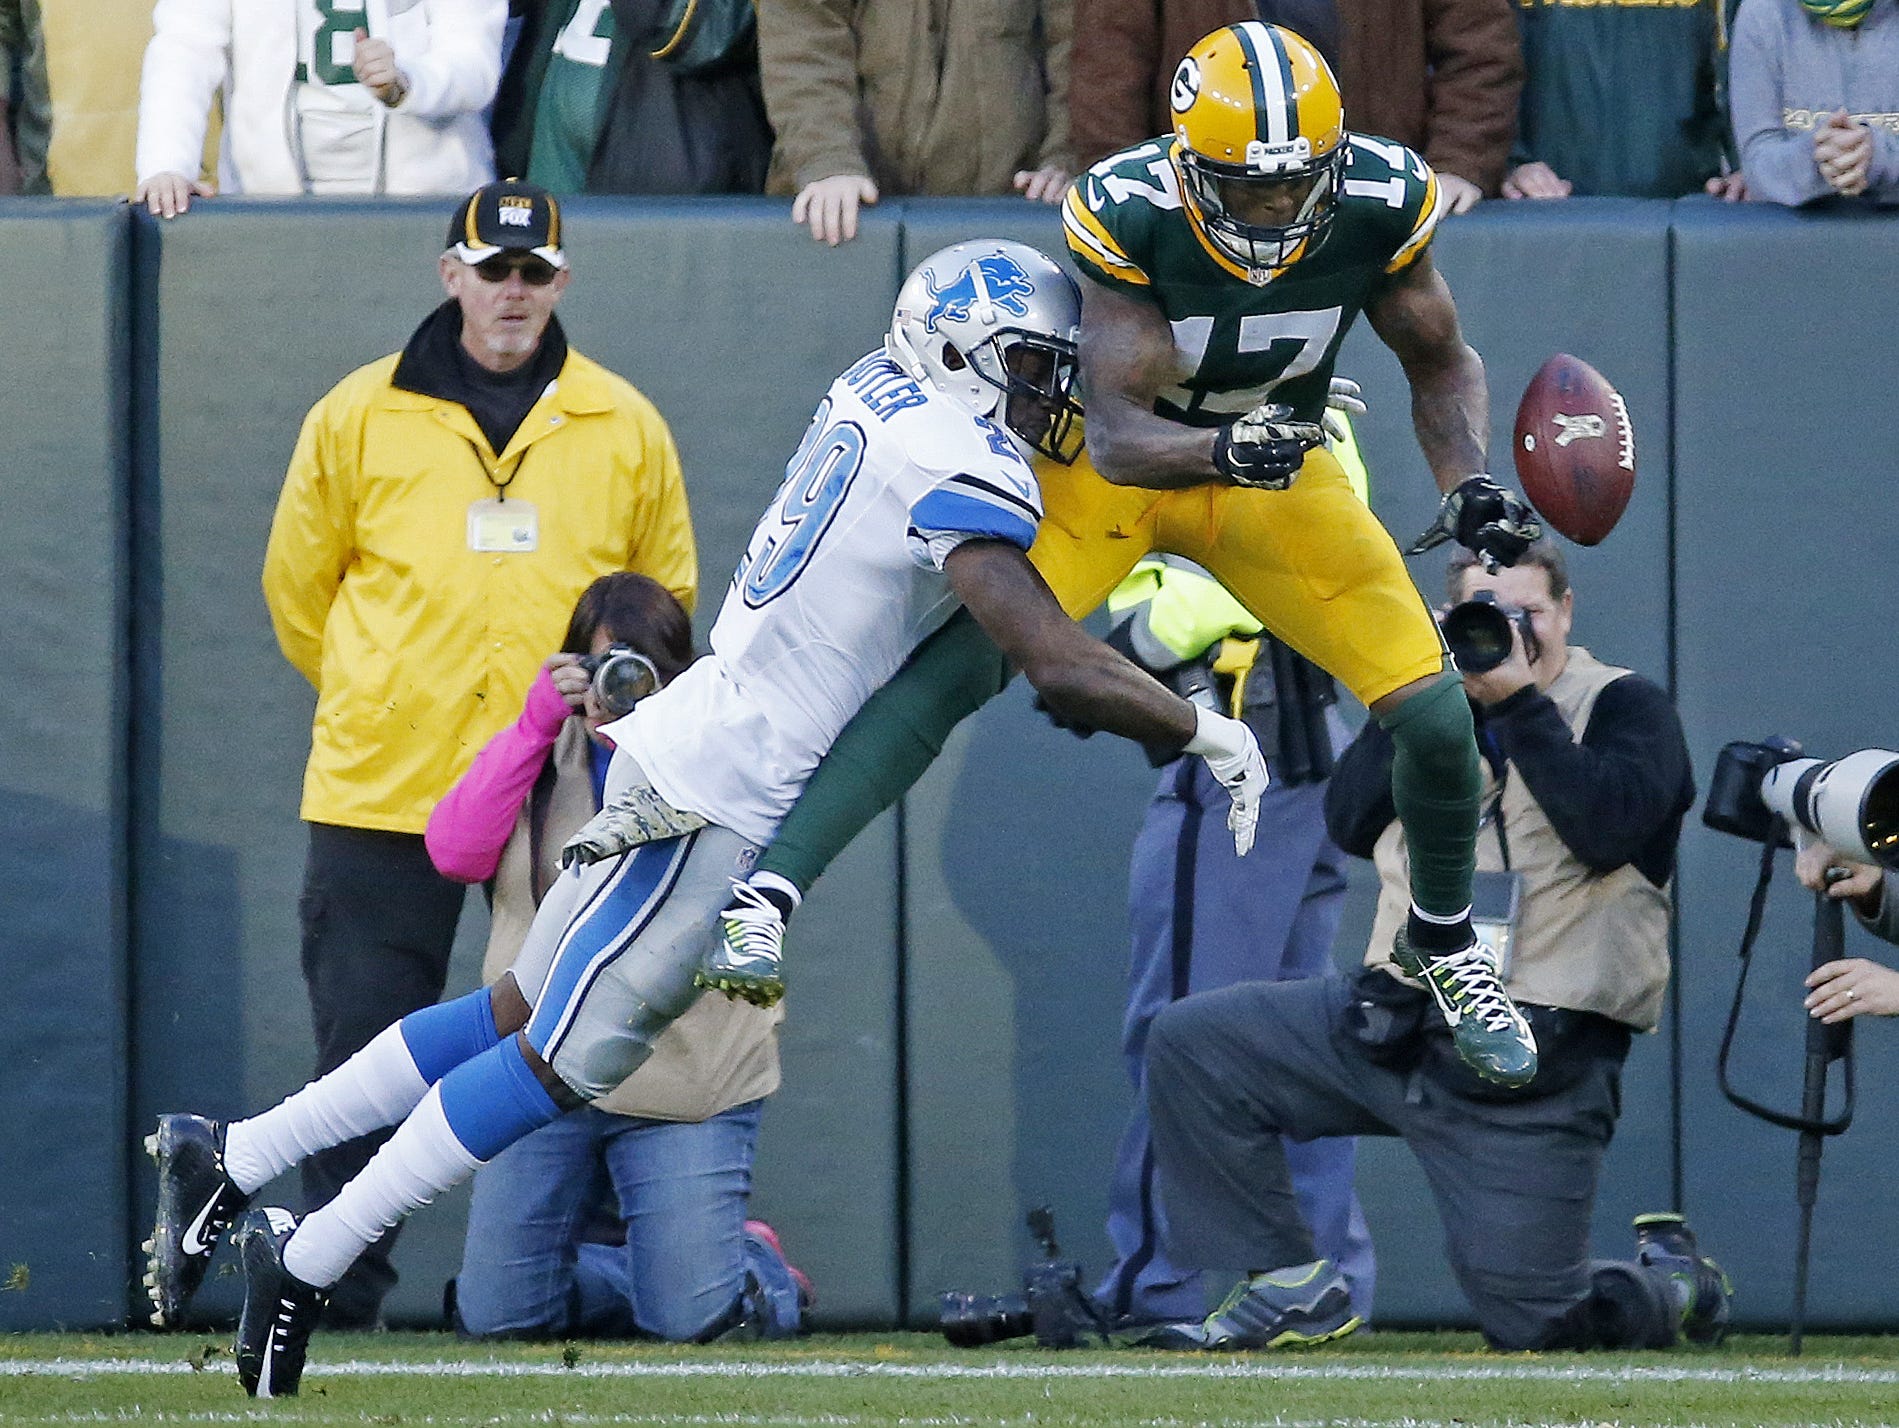 Detroit Lions' Crezdon Butler, a former Asheville High star, breaks up a two-point conversion intended for Green Bay Packers' Davante Adams last season in Green Bay, Wis. The Lions won 18-16.